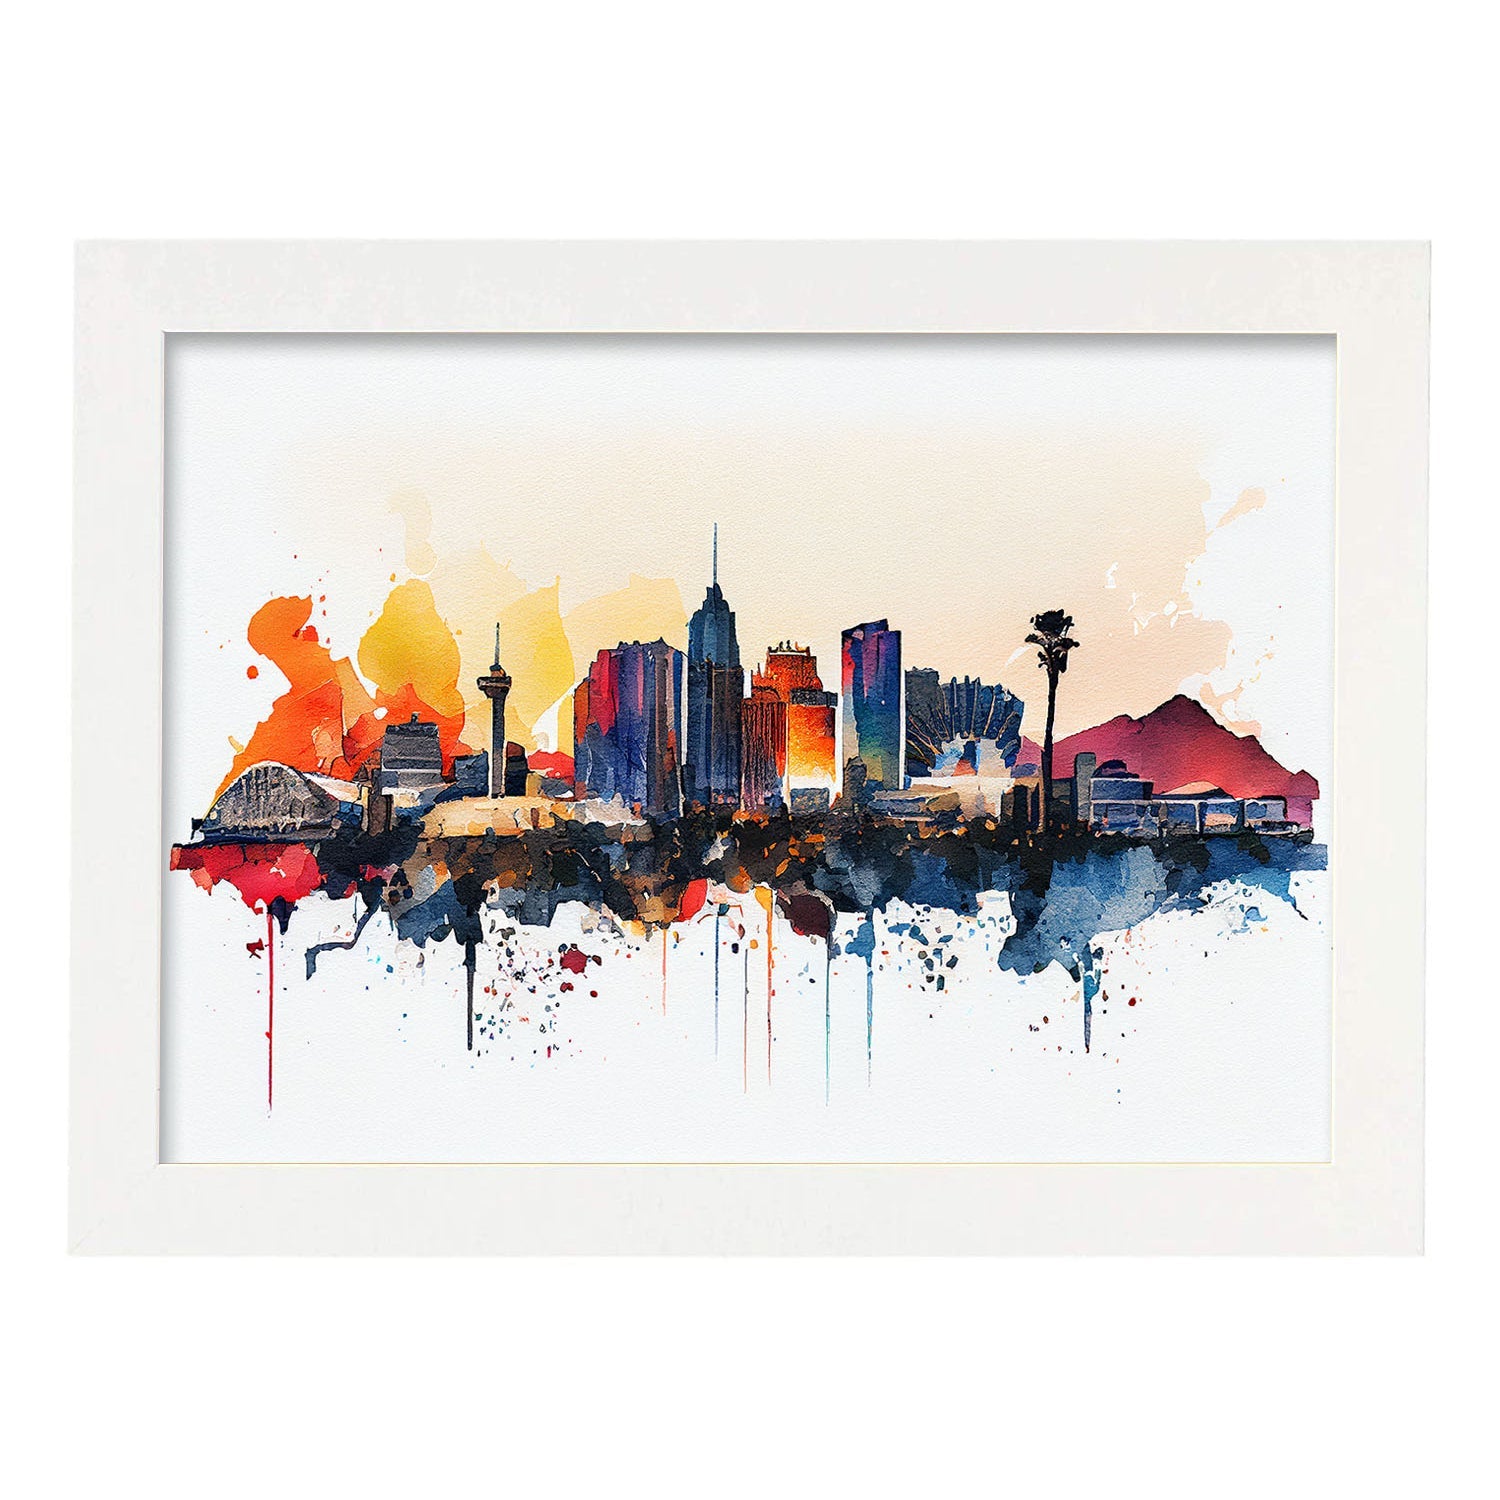 Nacnic watercolor of a skyline of the city of Las Vegas_1. Aesthetic Wall Art Prints for Bedroom or Living Room Design.-Artwork-Nacnic-A4-Marco Blanco-Nacnic Estudio SL